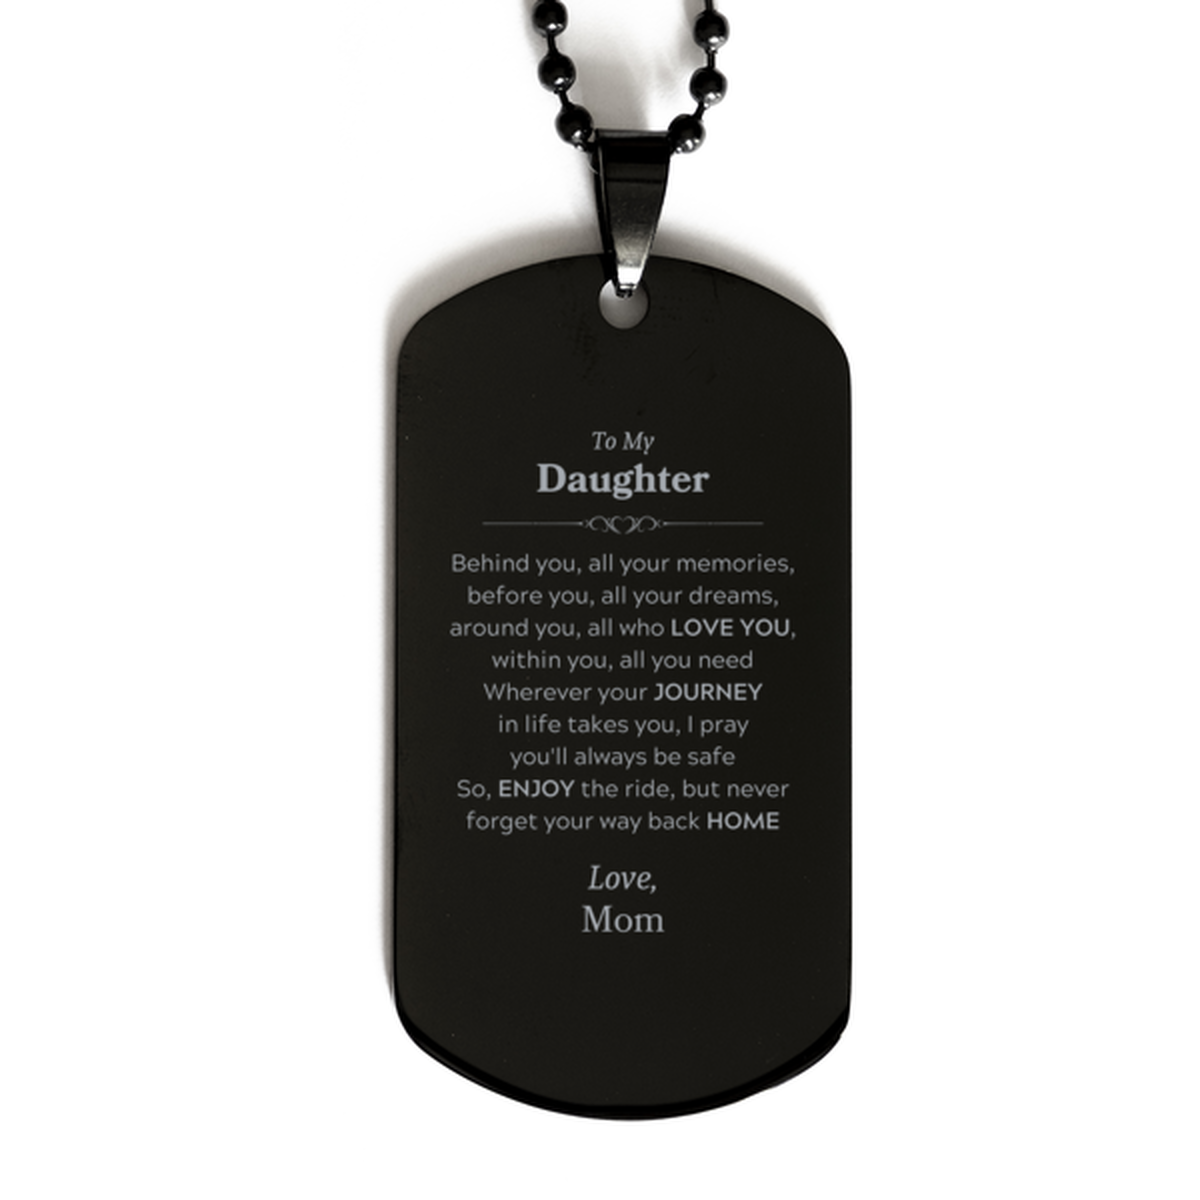 To My Daughter Graduation Gifts from Mom, Daughter Black Dog Tag Christmas Birthday Gifts for Daughter Behind you, all your memories, before you, all your dreams. Love, Mom